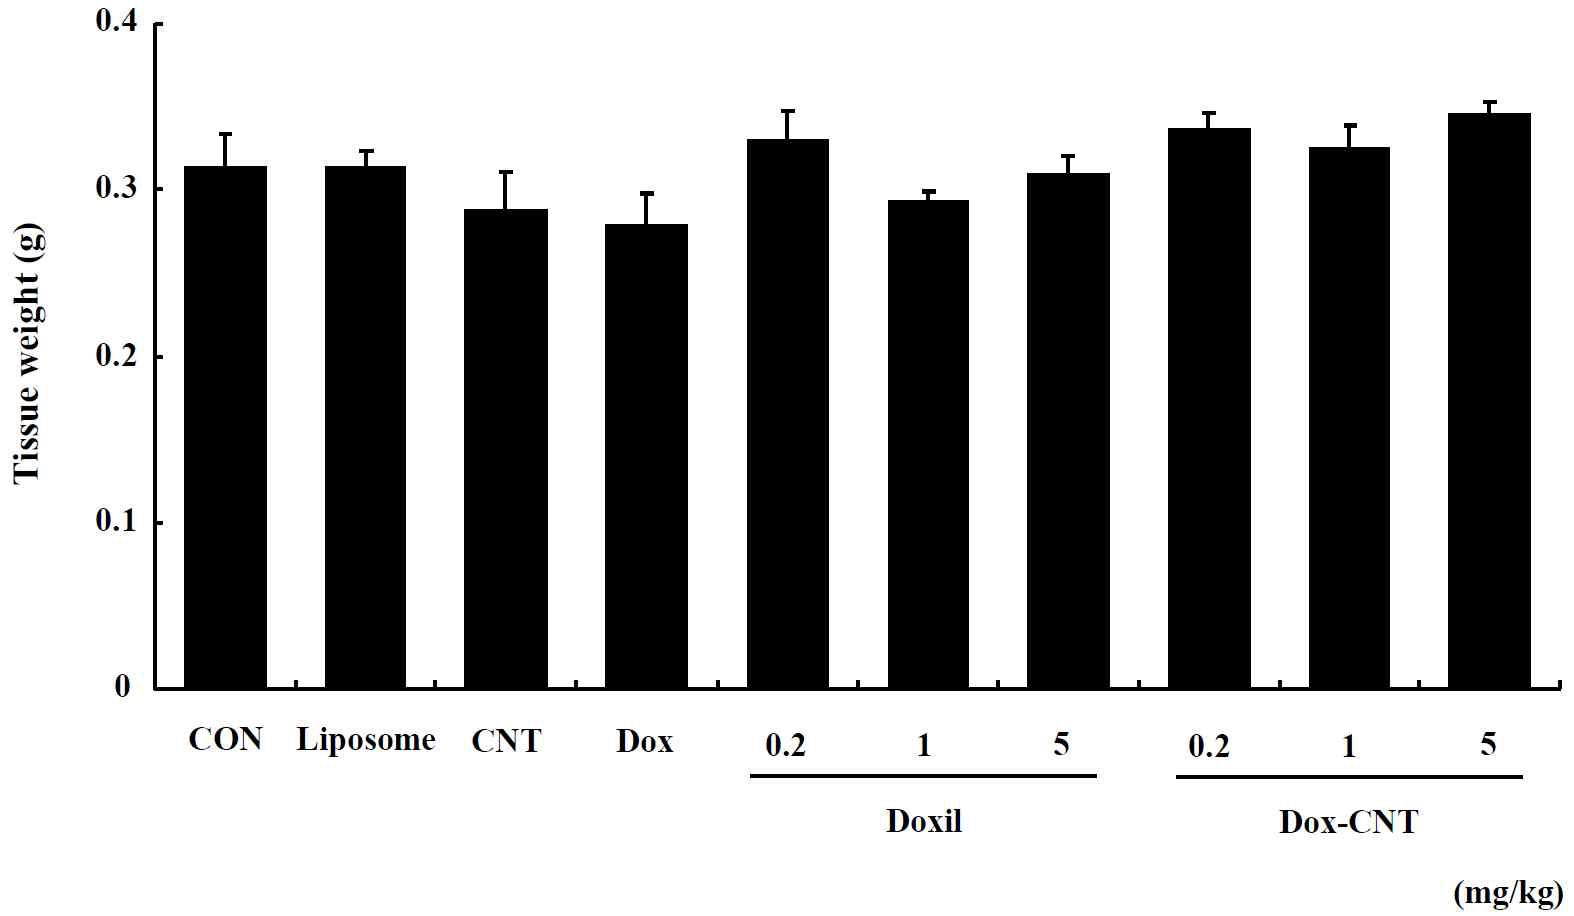 The change of brain weight in male ICR mice of repeated exposure for 14 days. Mice were respectively administered by intravenous injection with liposome, CNT, Dox, Doxil (0.2, 1, 5 mg/kg) and Dox-CNT (0.2, 1, 5 mg/kg). The results are presented as mean ± SE (n = 10). * p < 0.05, significantly different from the control